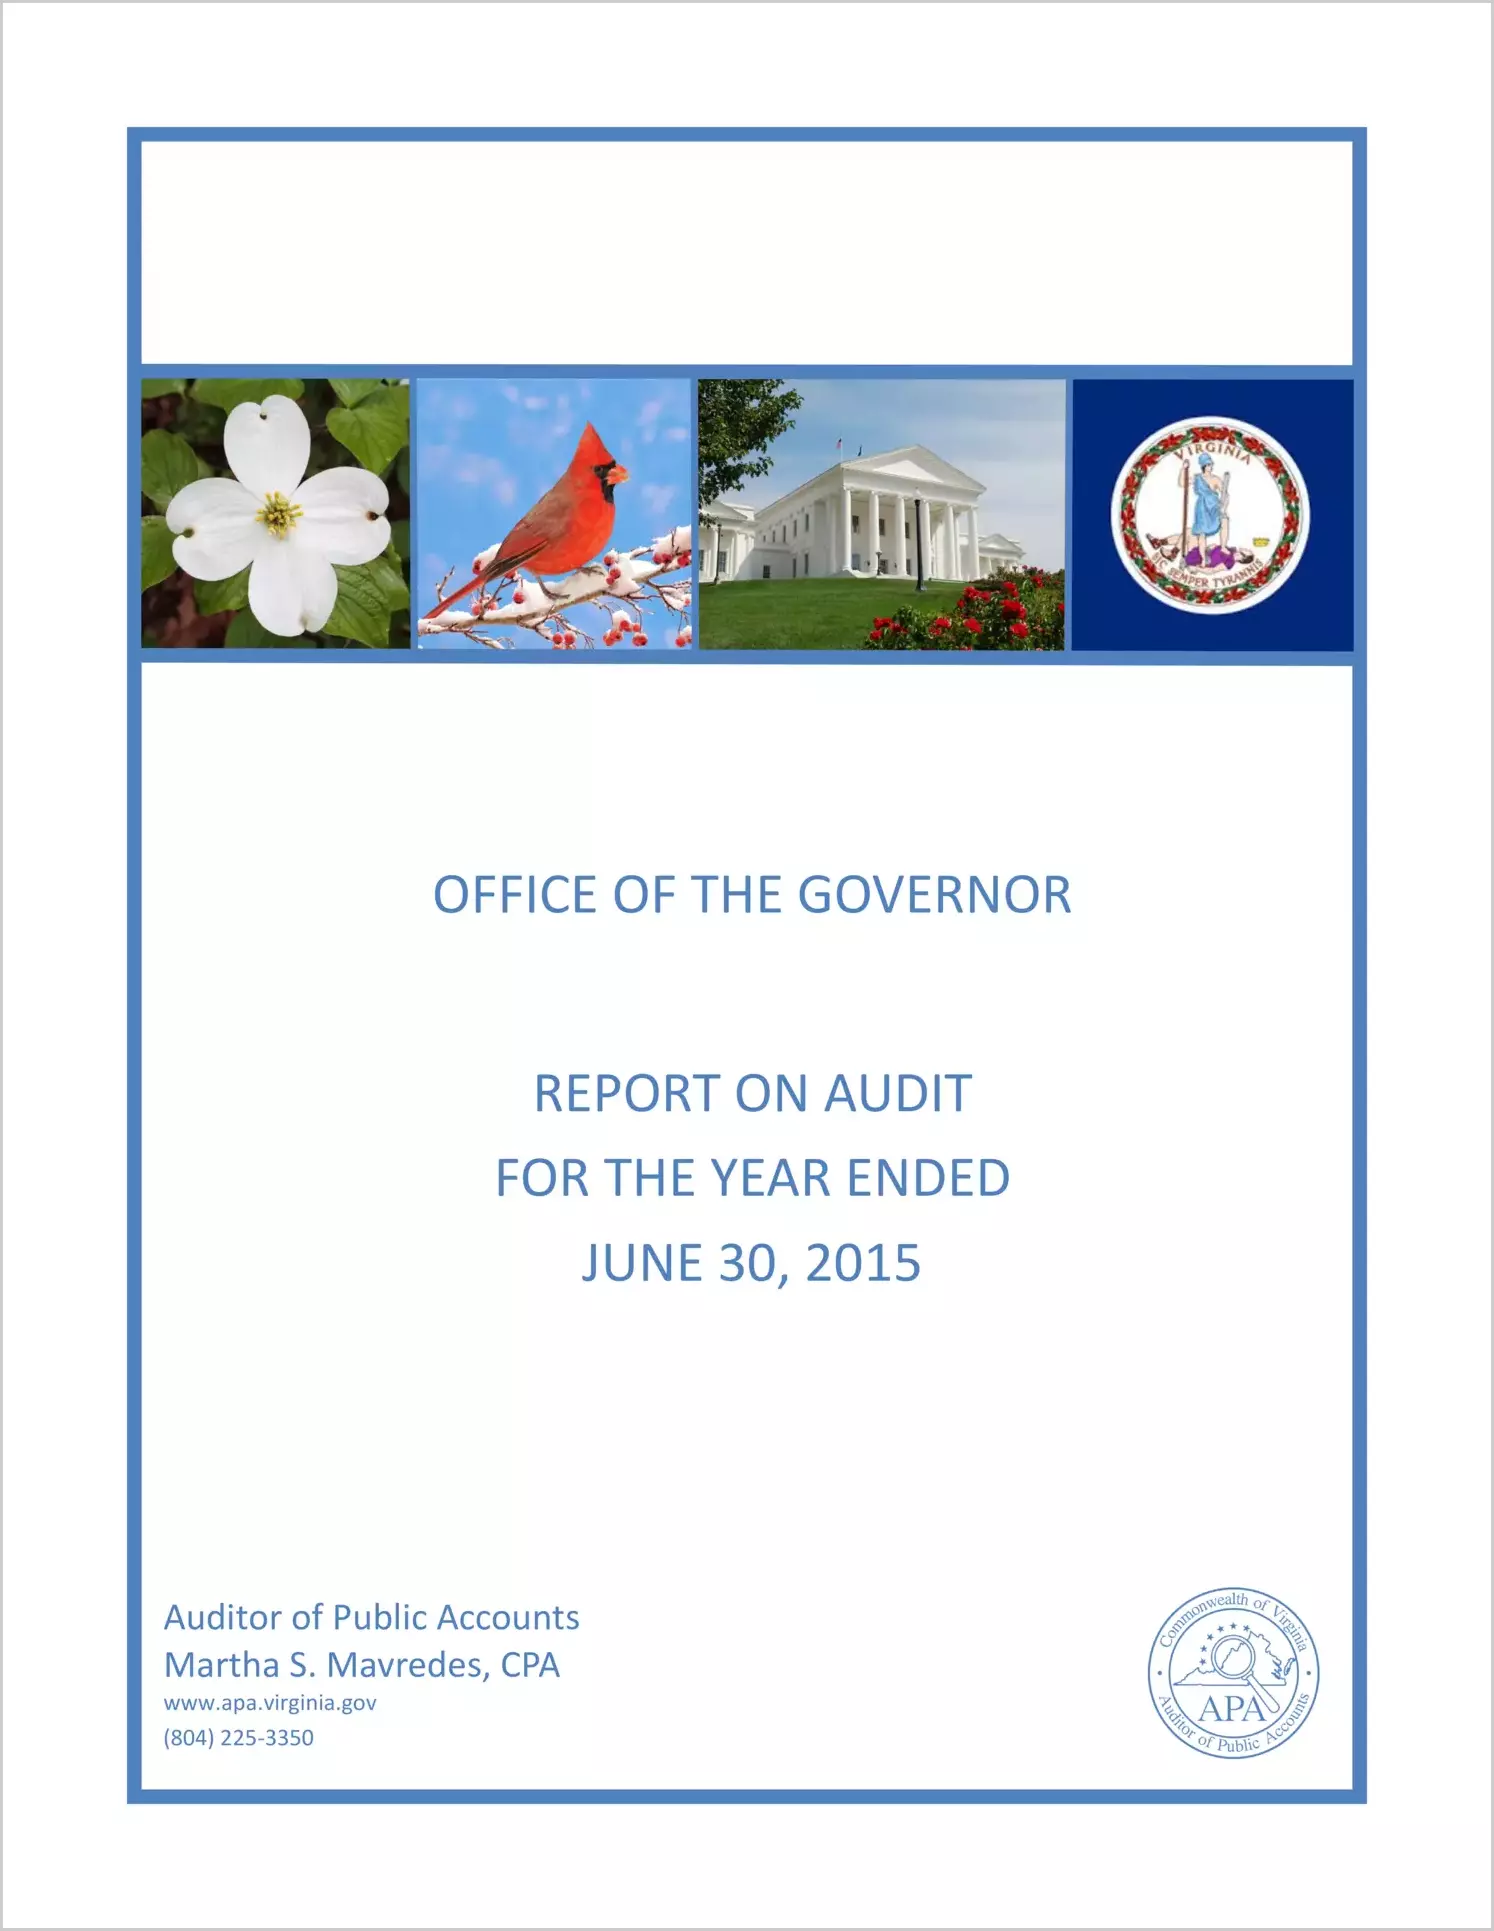 Office of the Governor for the year ended June 30, 2015